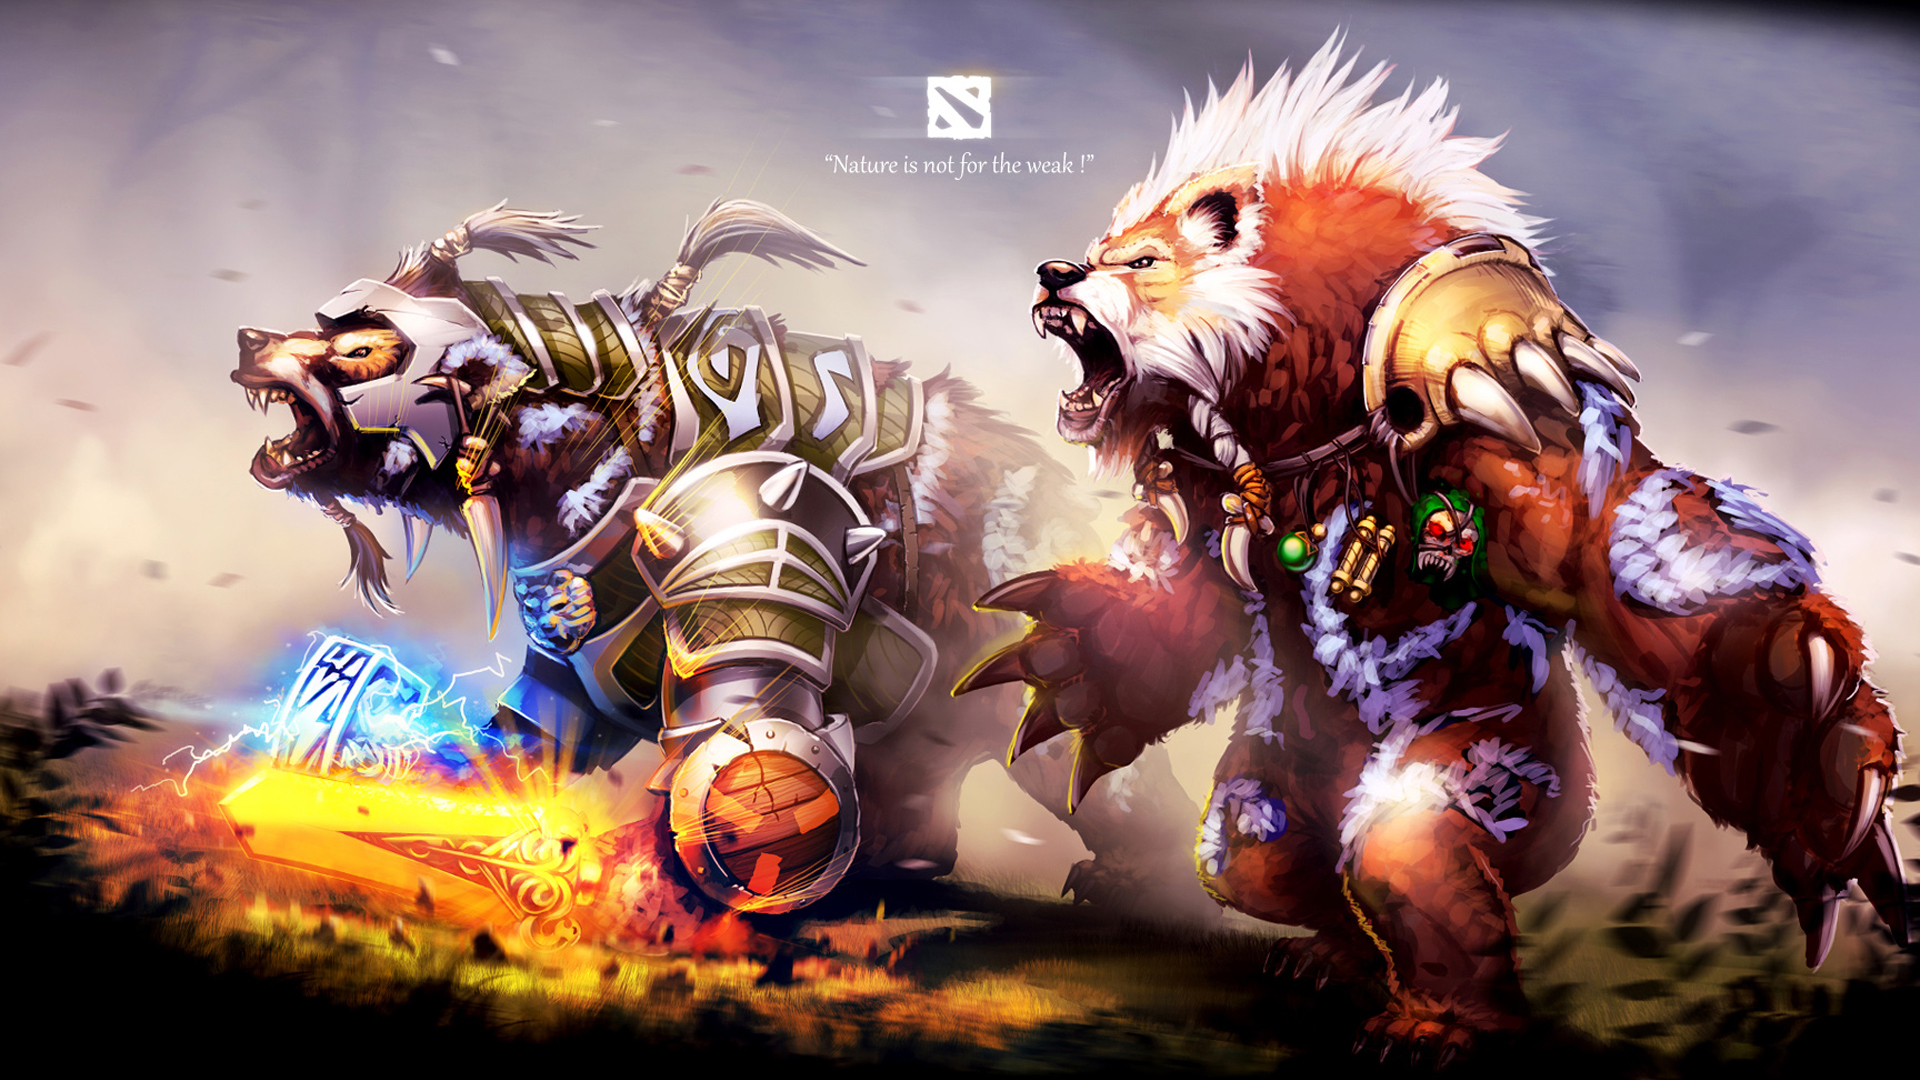 Dota 2, Steam (software), Defense of the Ancients, Video games, Lone Druid, Bears Wallpaper